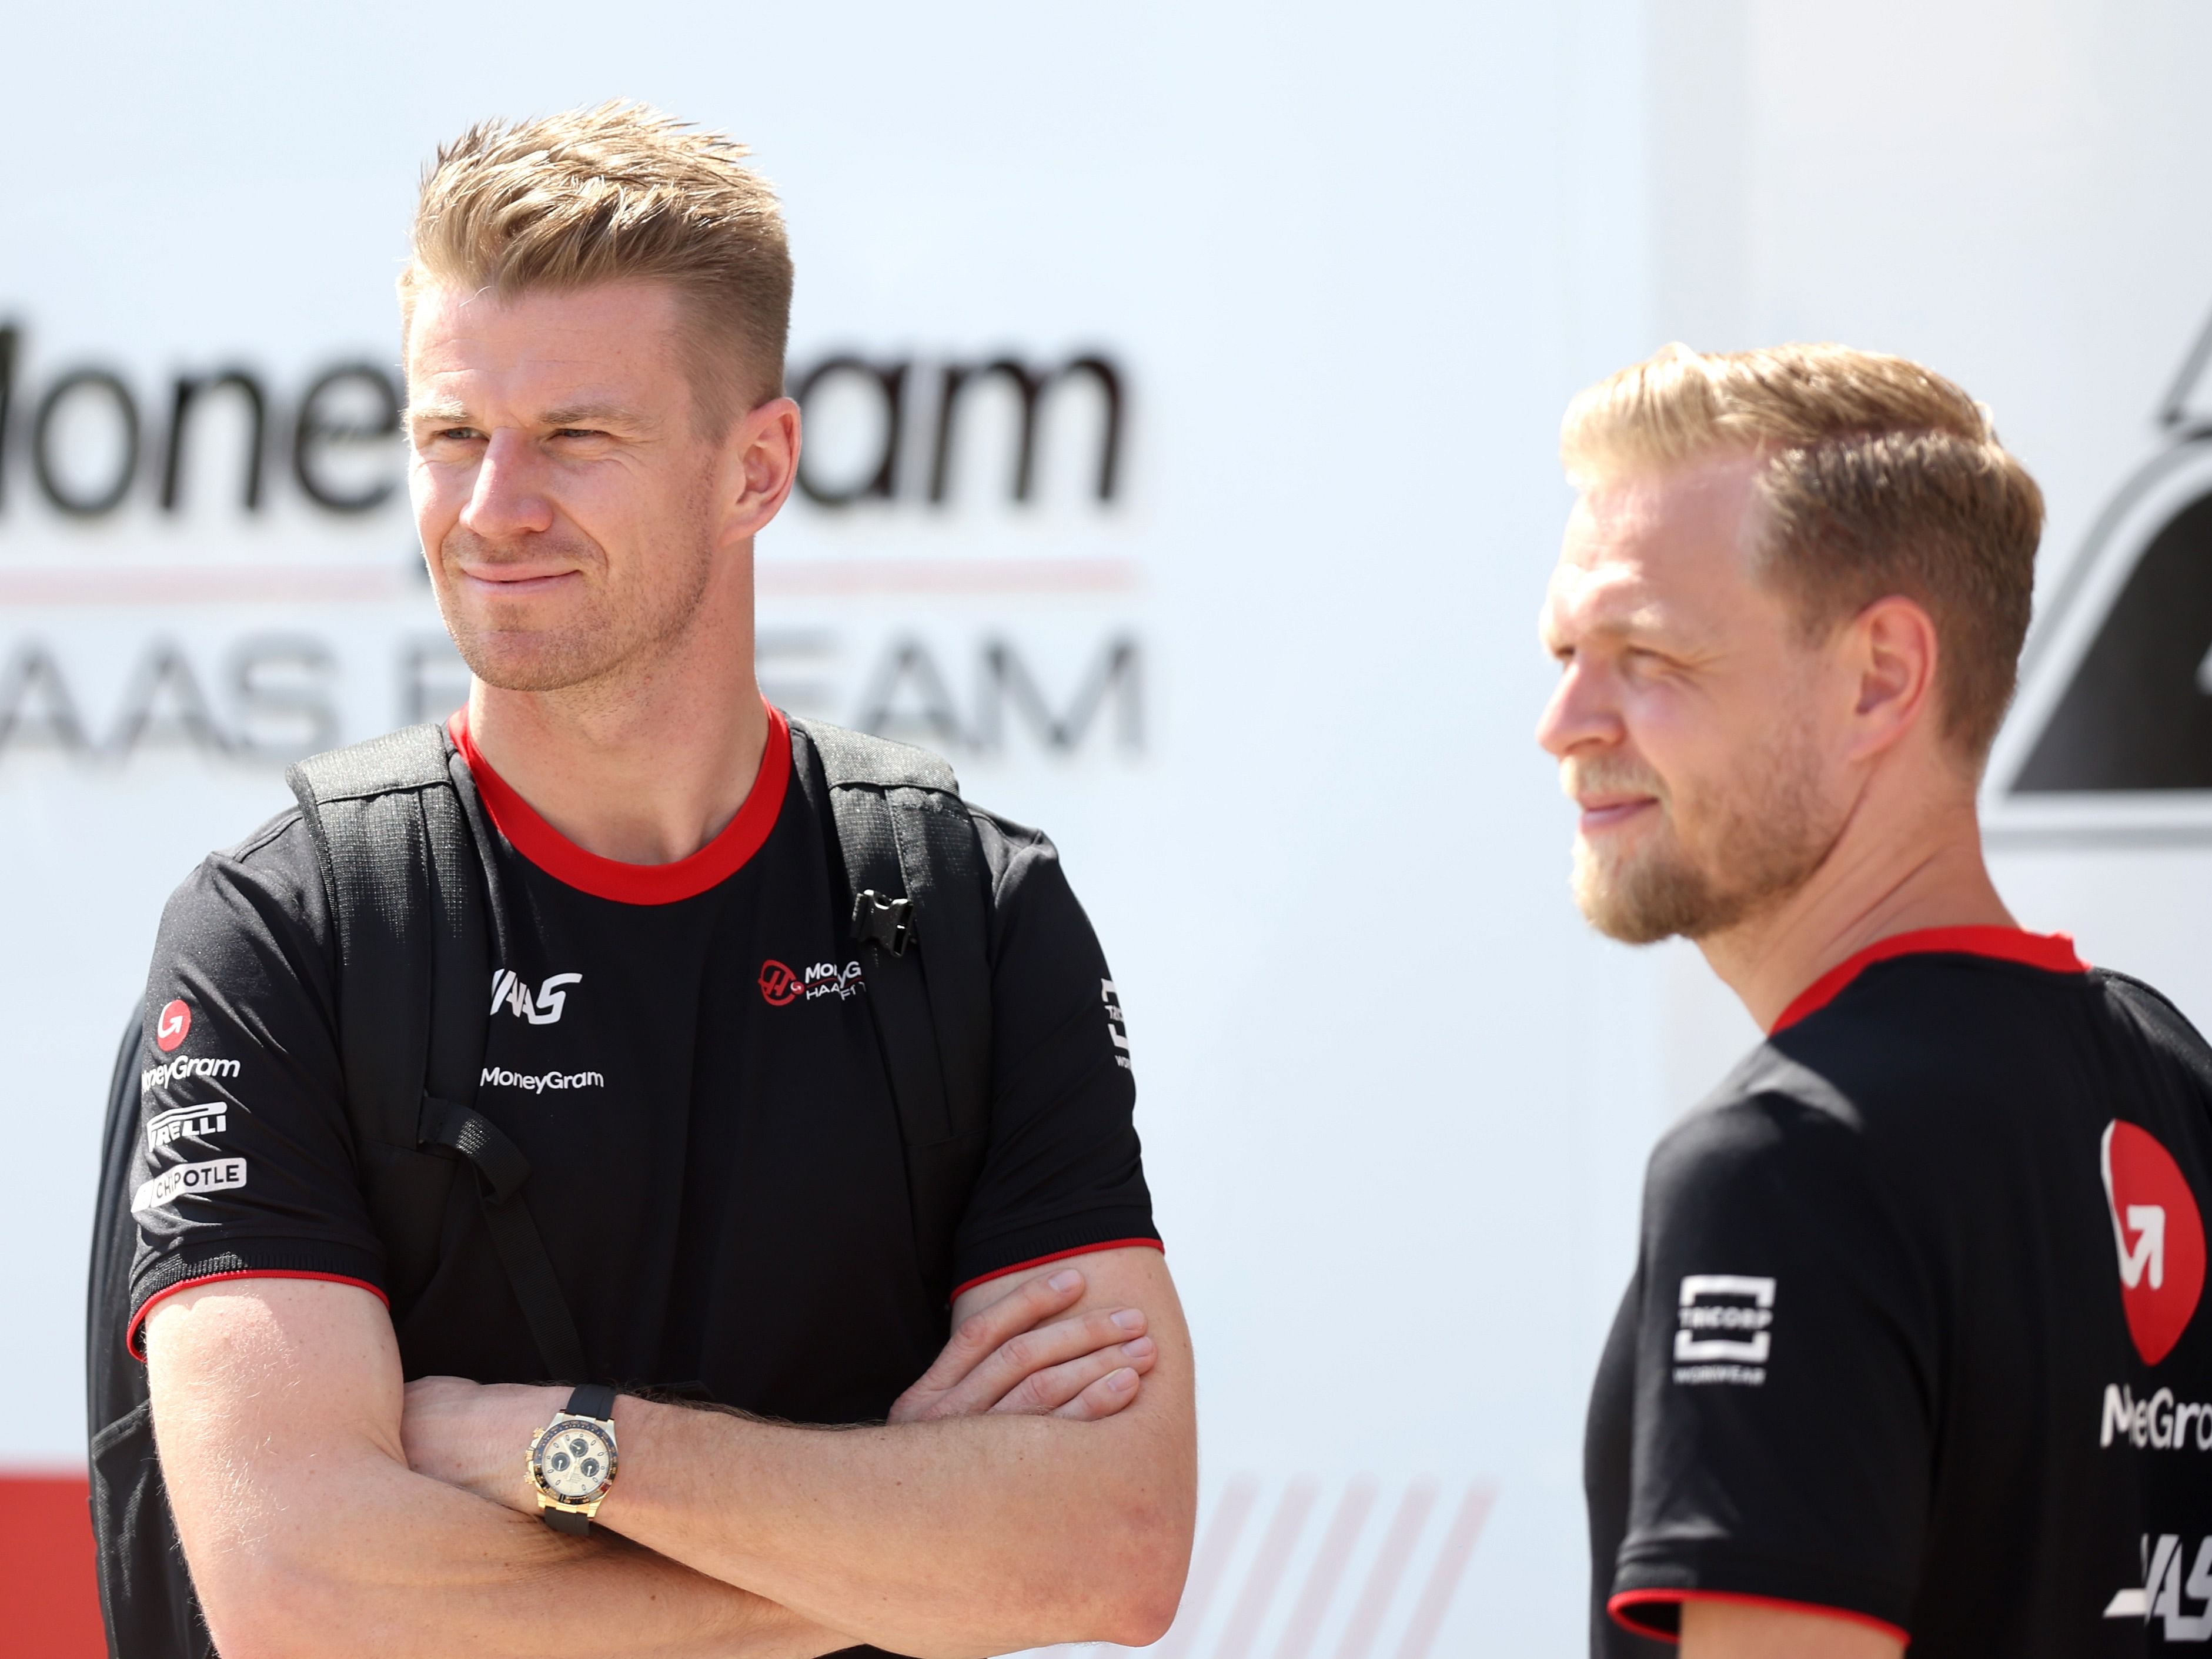 Kevin Magnussen and Nico Hulkenberg look on in the paddock during previews ahead of the 2023 F1 Bahrain Grand Prix. (Photo by Lars Baron/Getty Images)